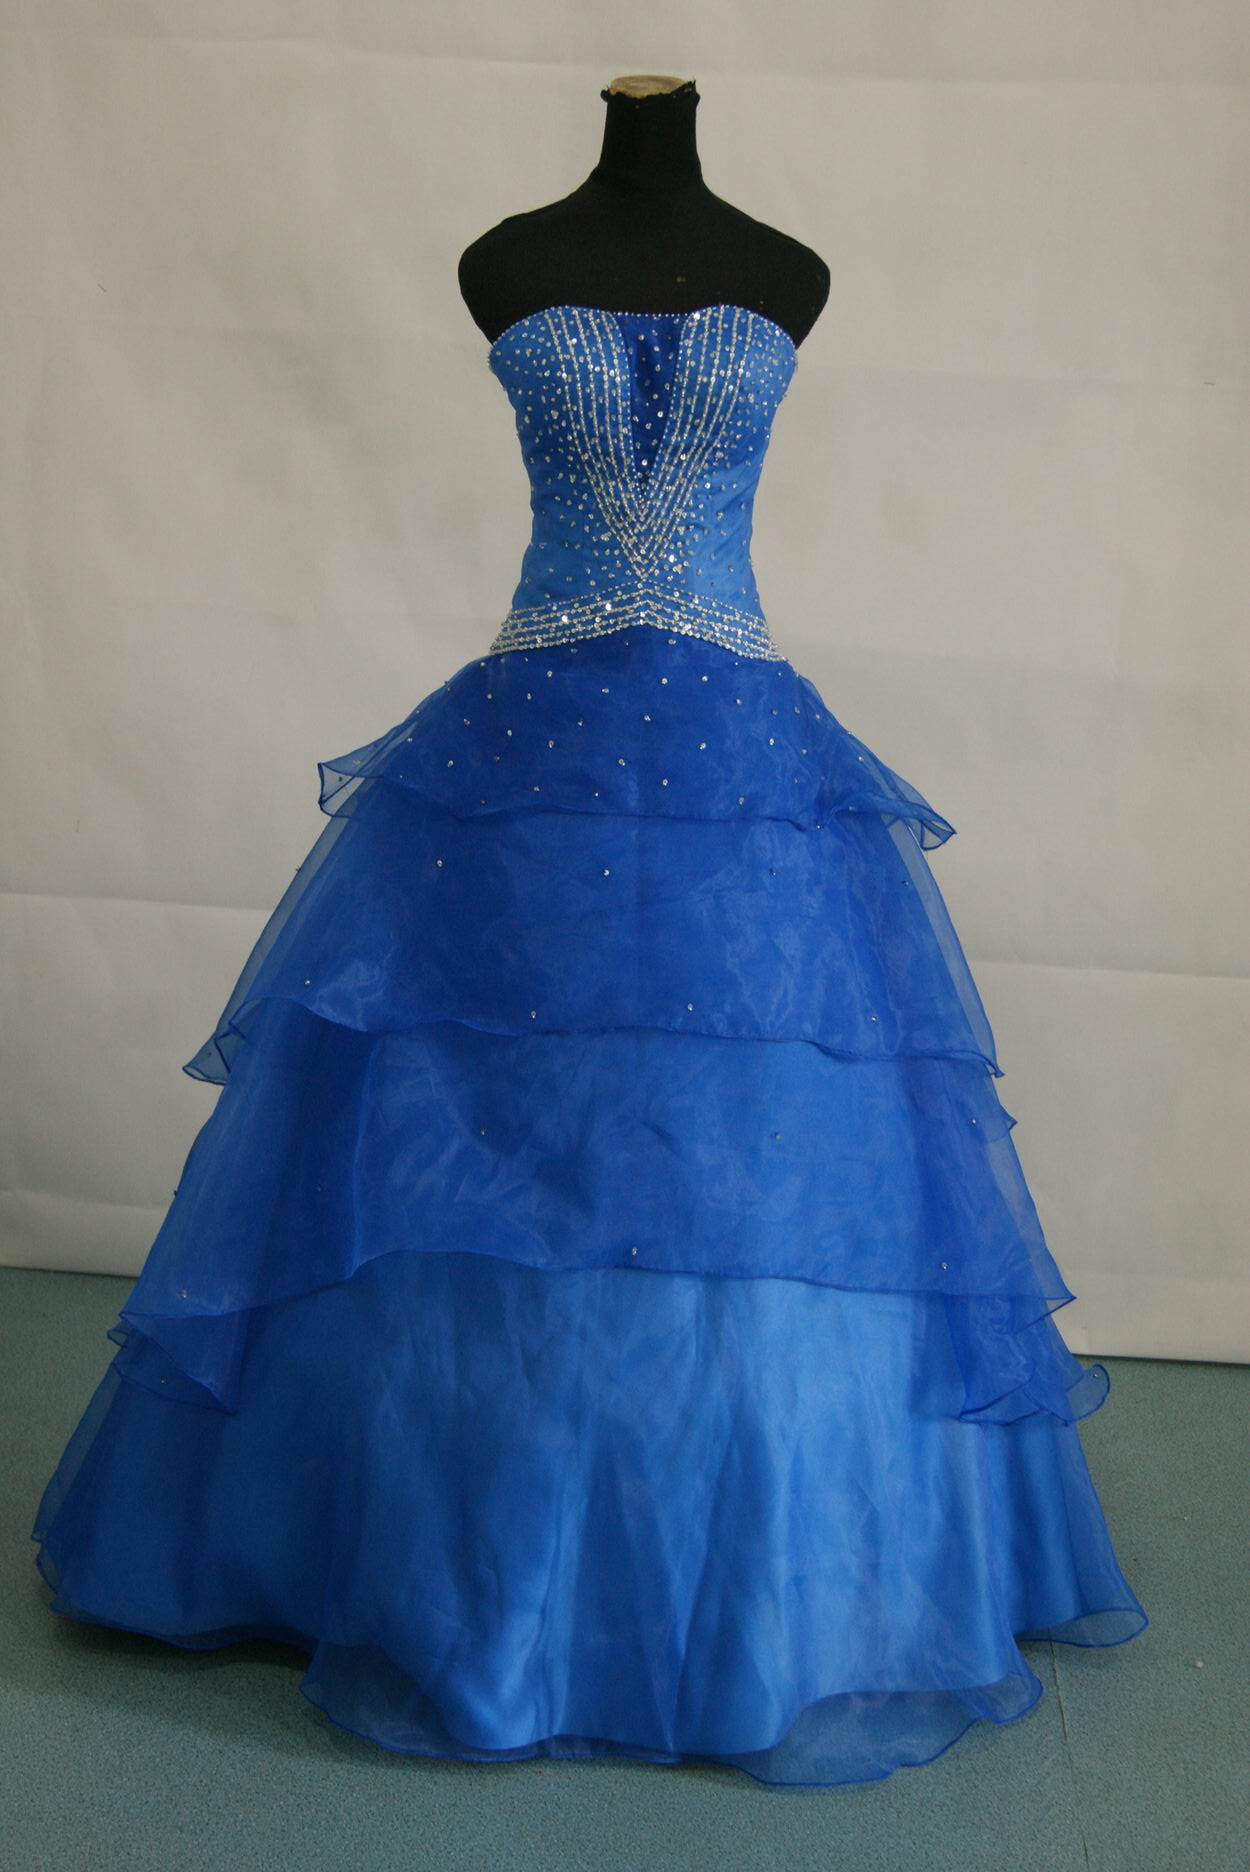 prom dress, royal blue, sequin and clear beaded embroidery